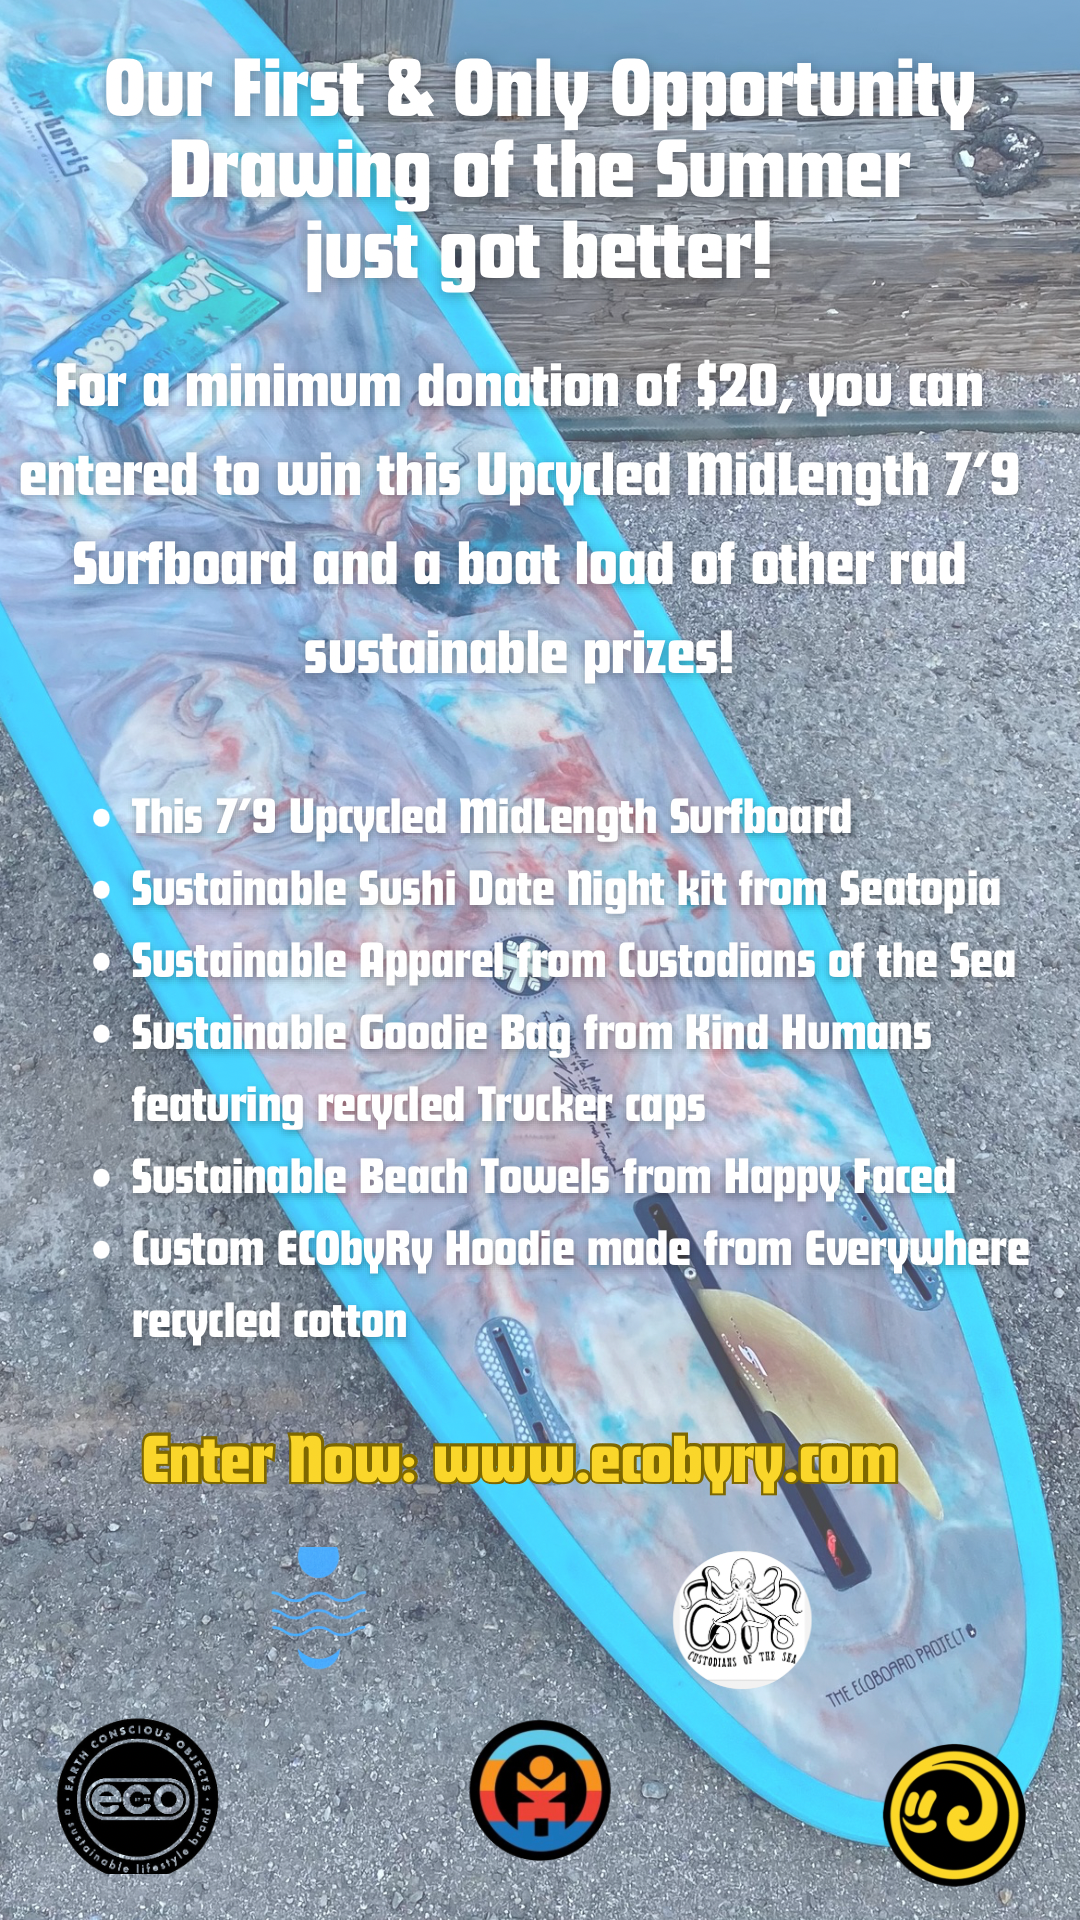 Summer Opportunity Drawing for the 7’9 Upcycled MidLength